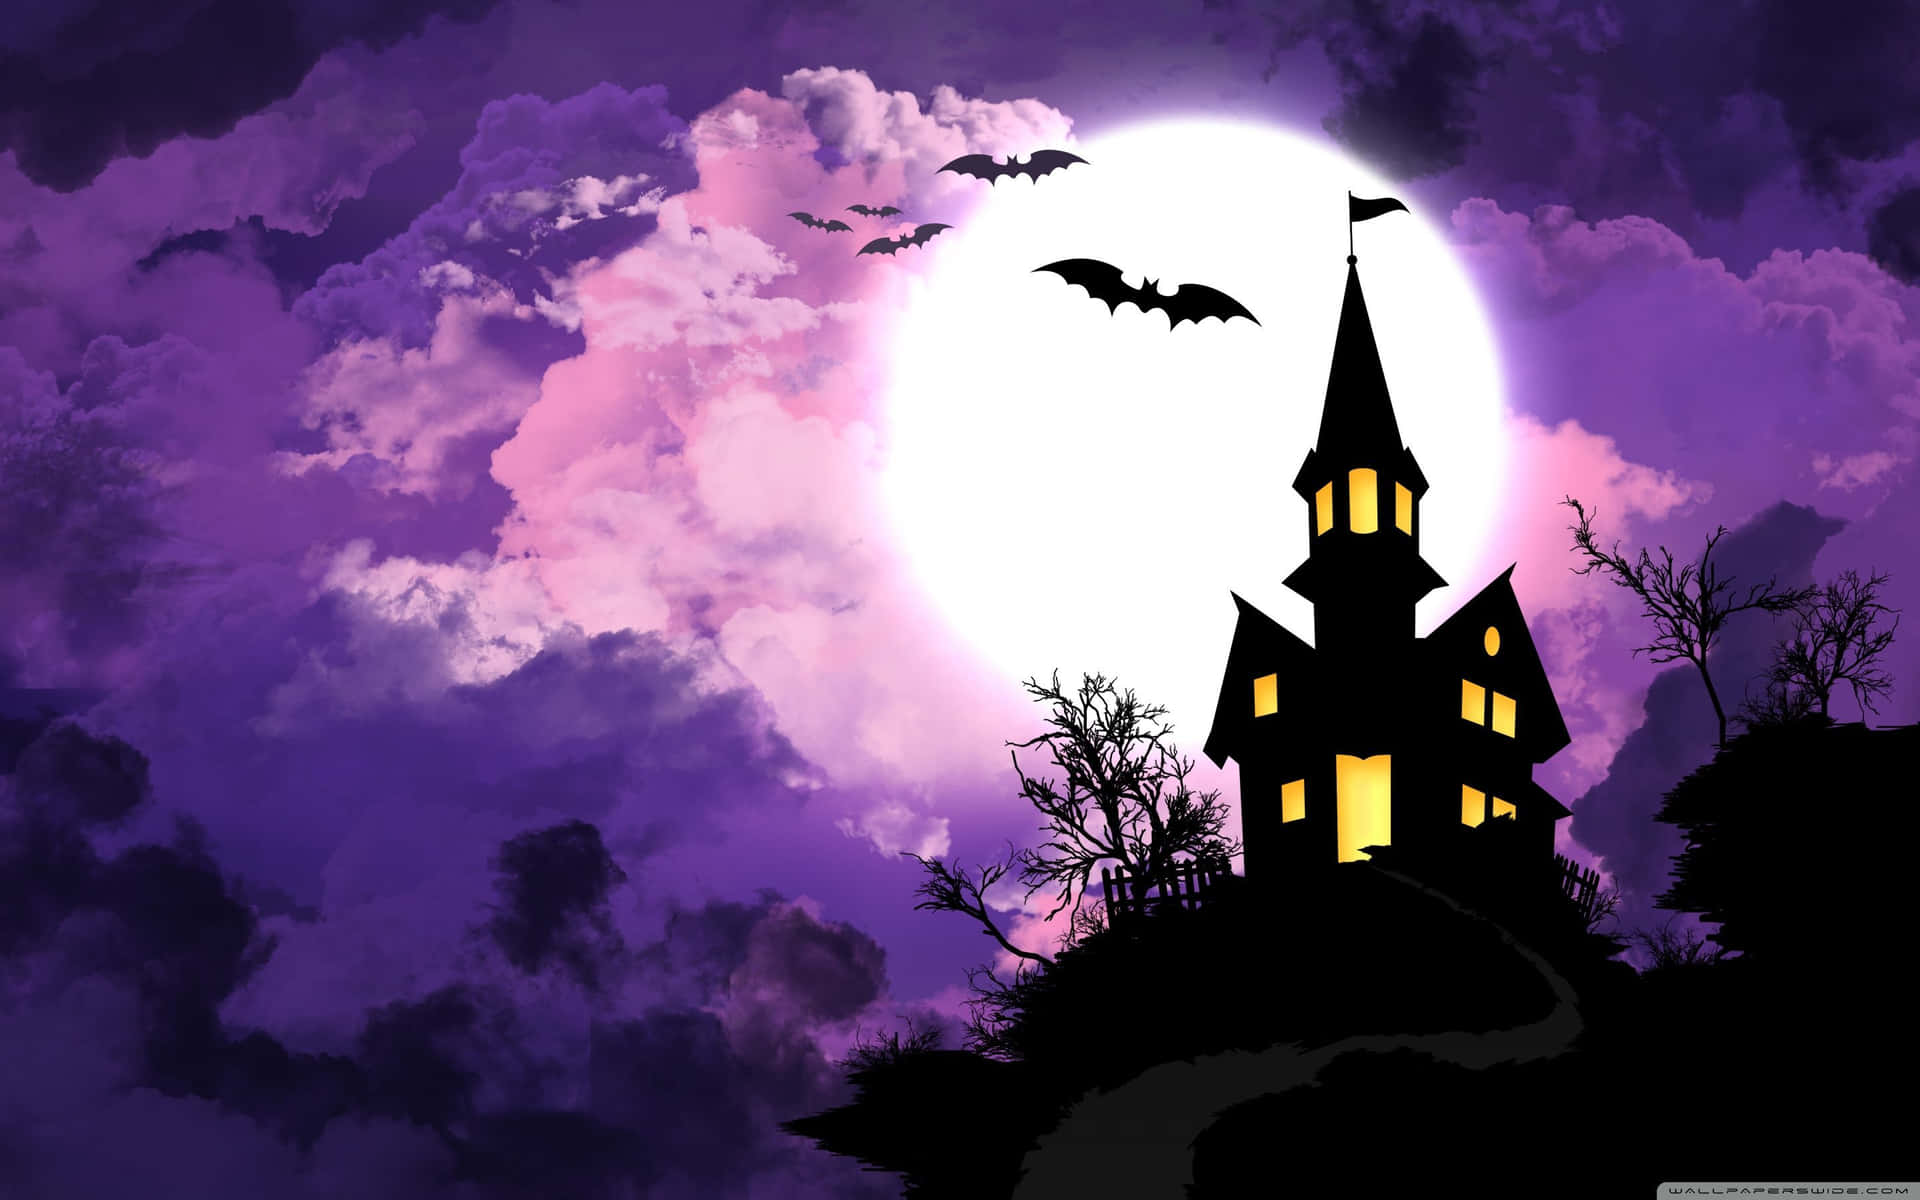 Prepare for a spooky Halloween filled with eerie surprises!